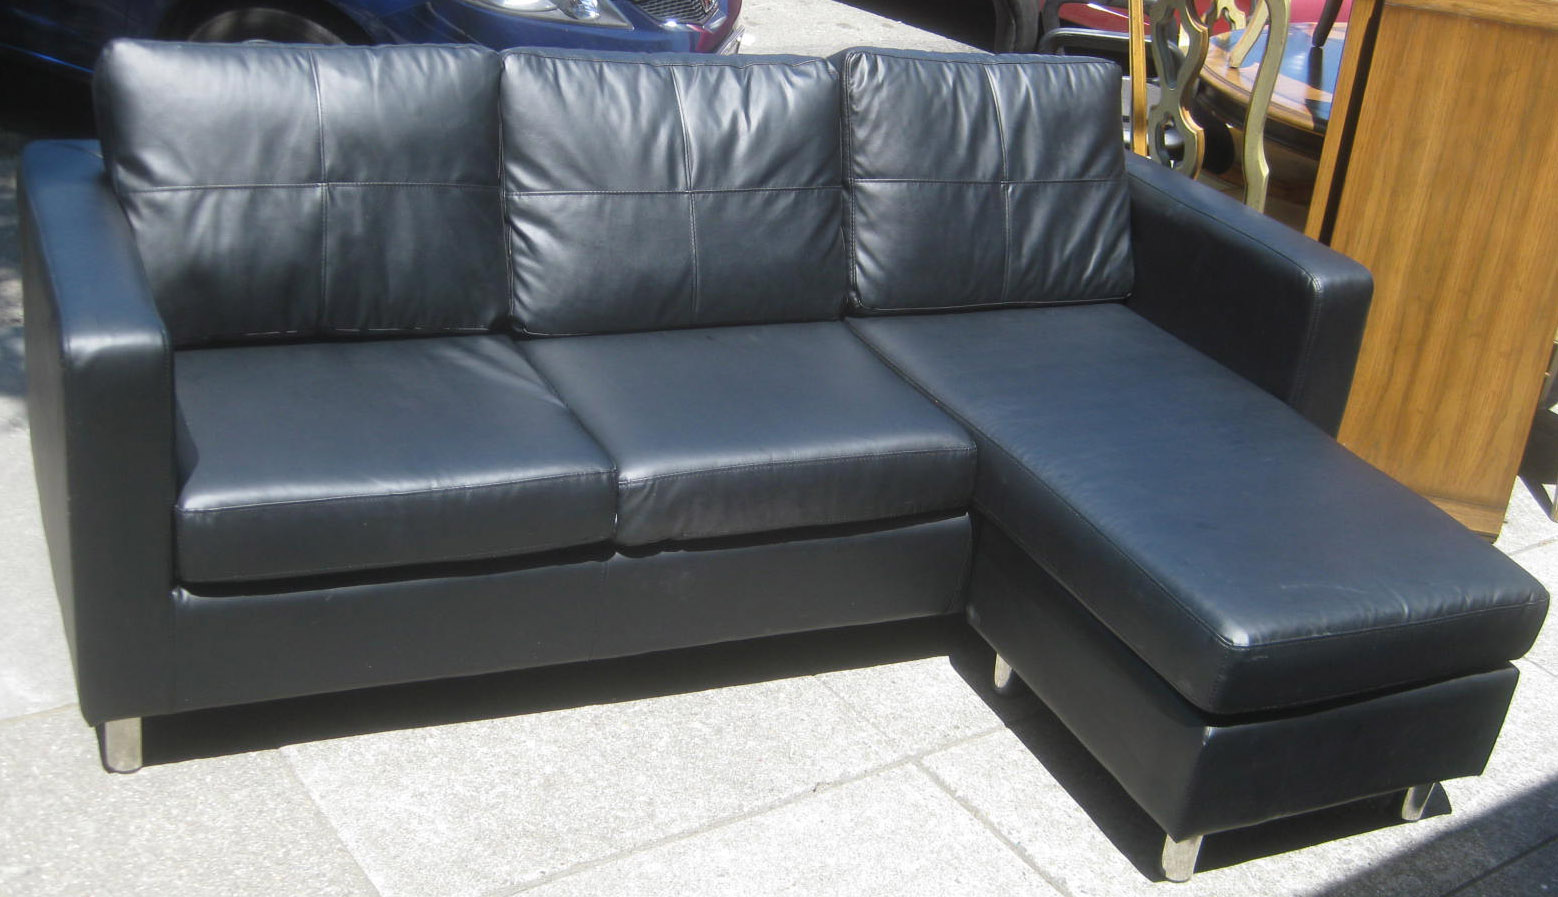 simulated leather sofa meaning